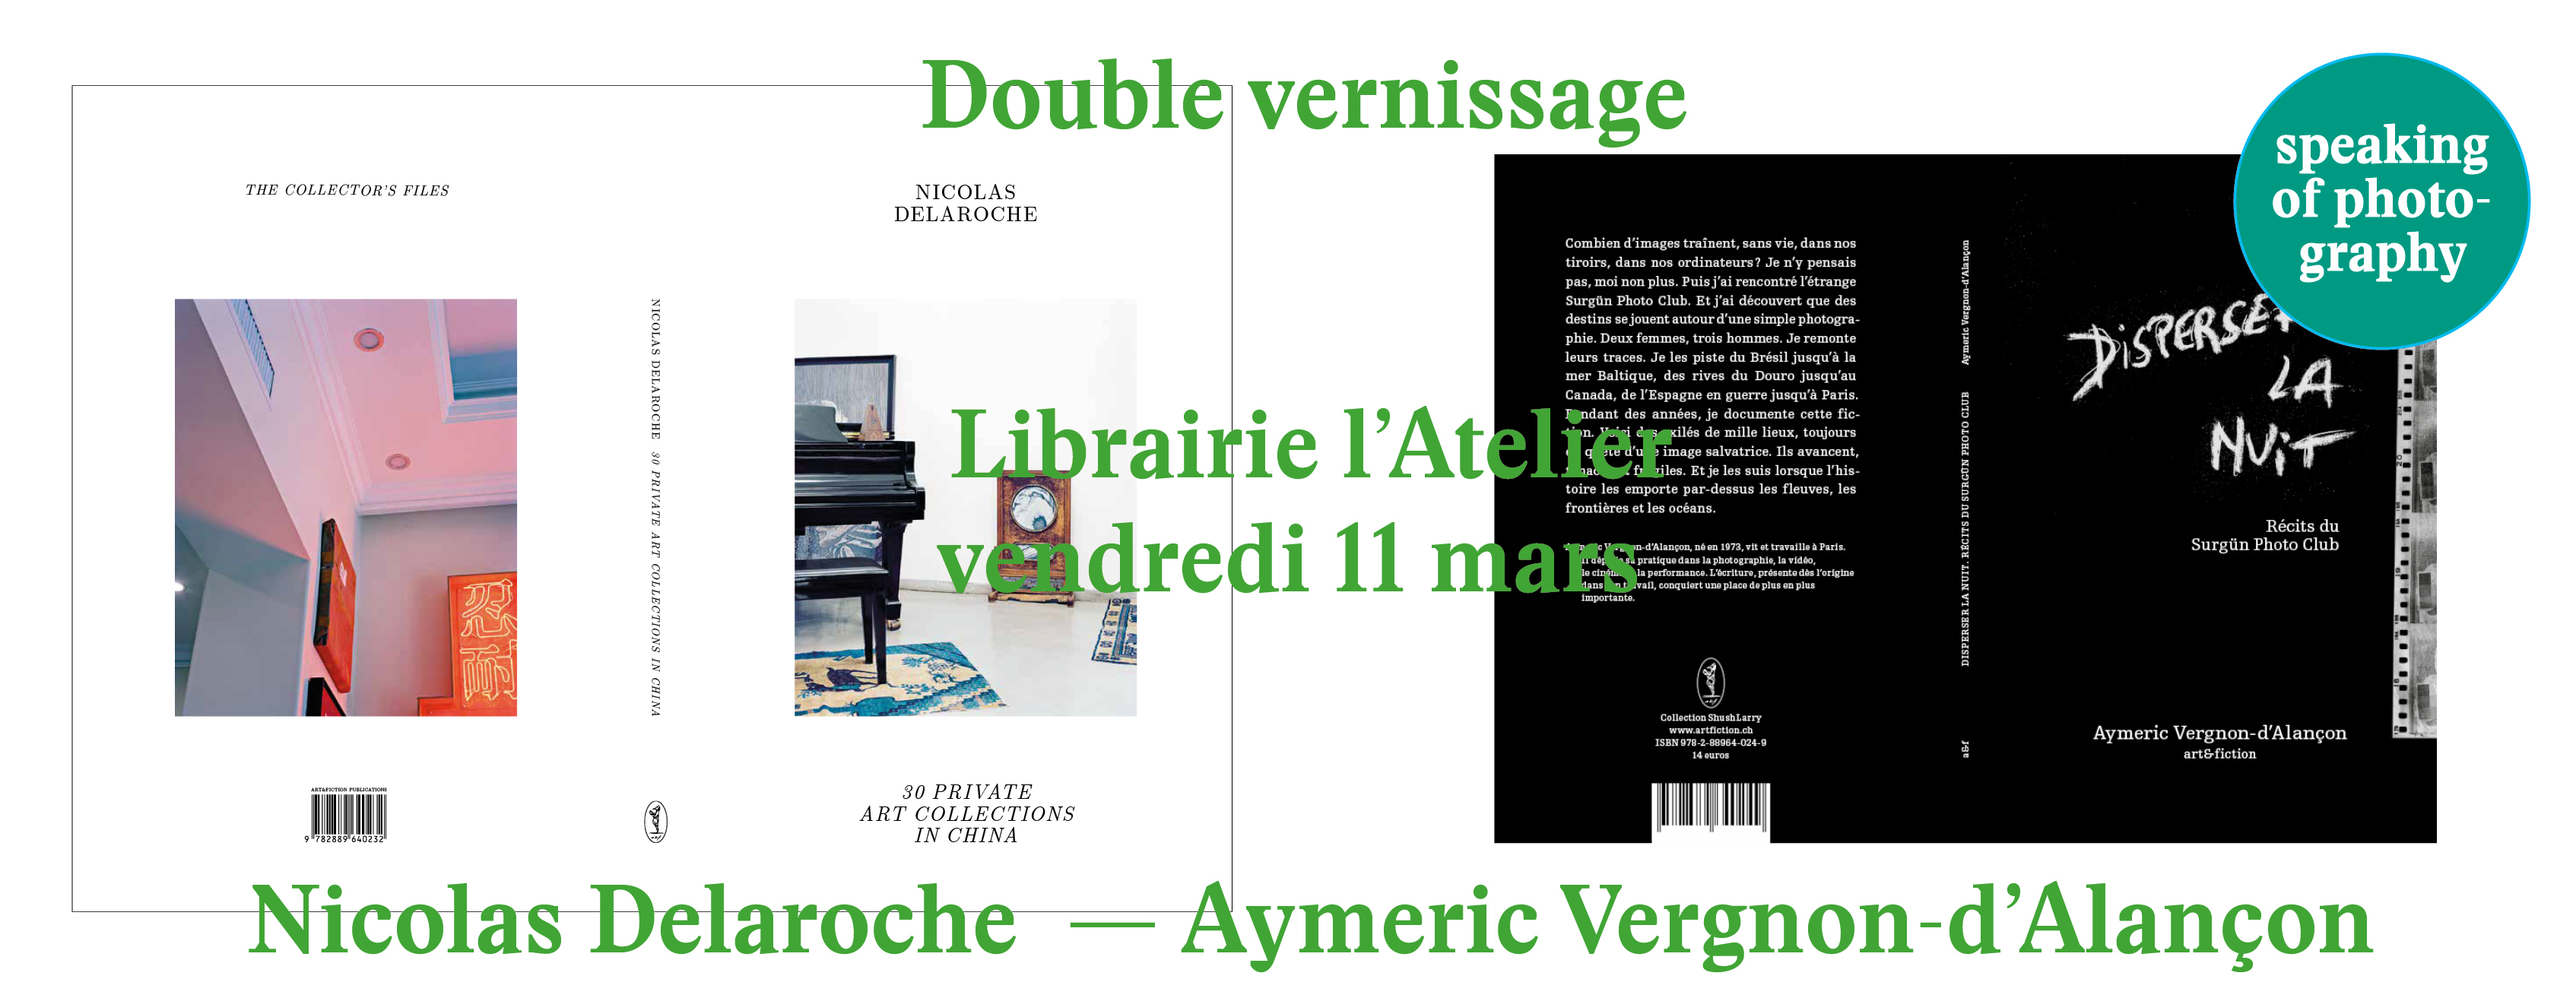 Speaking of photography - Librairie l'Atelier